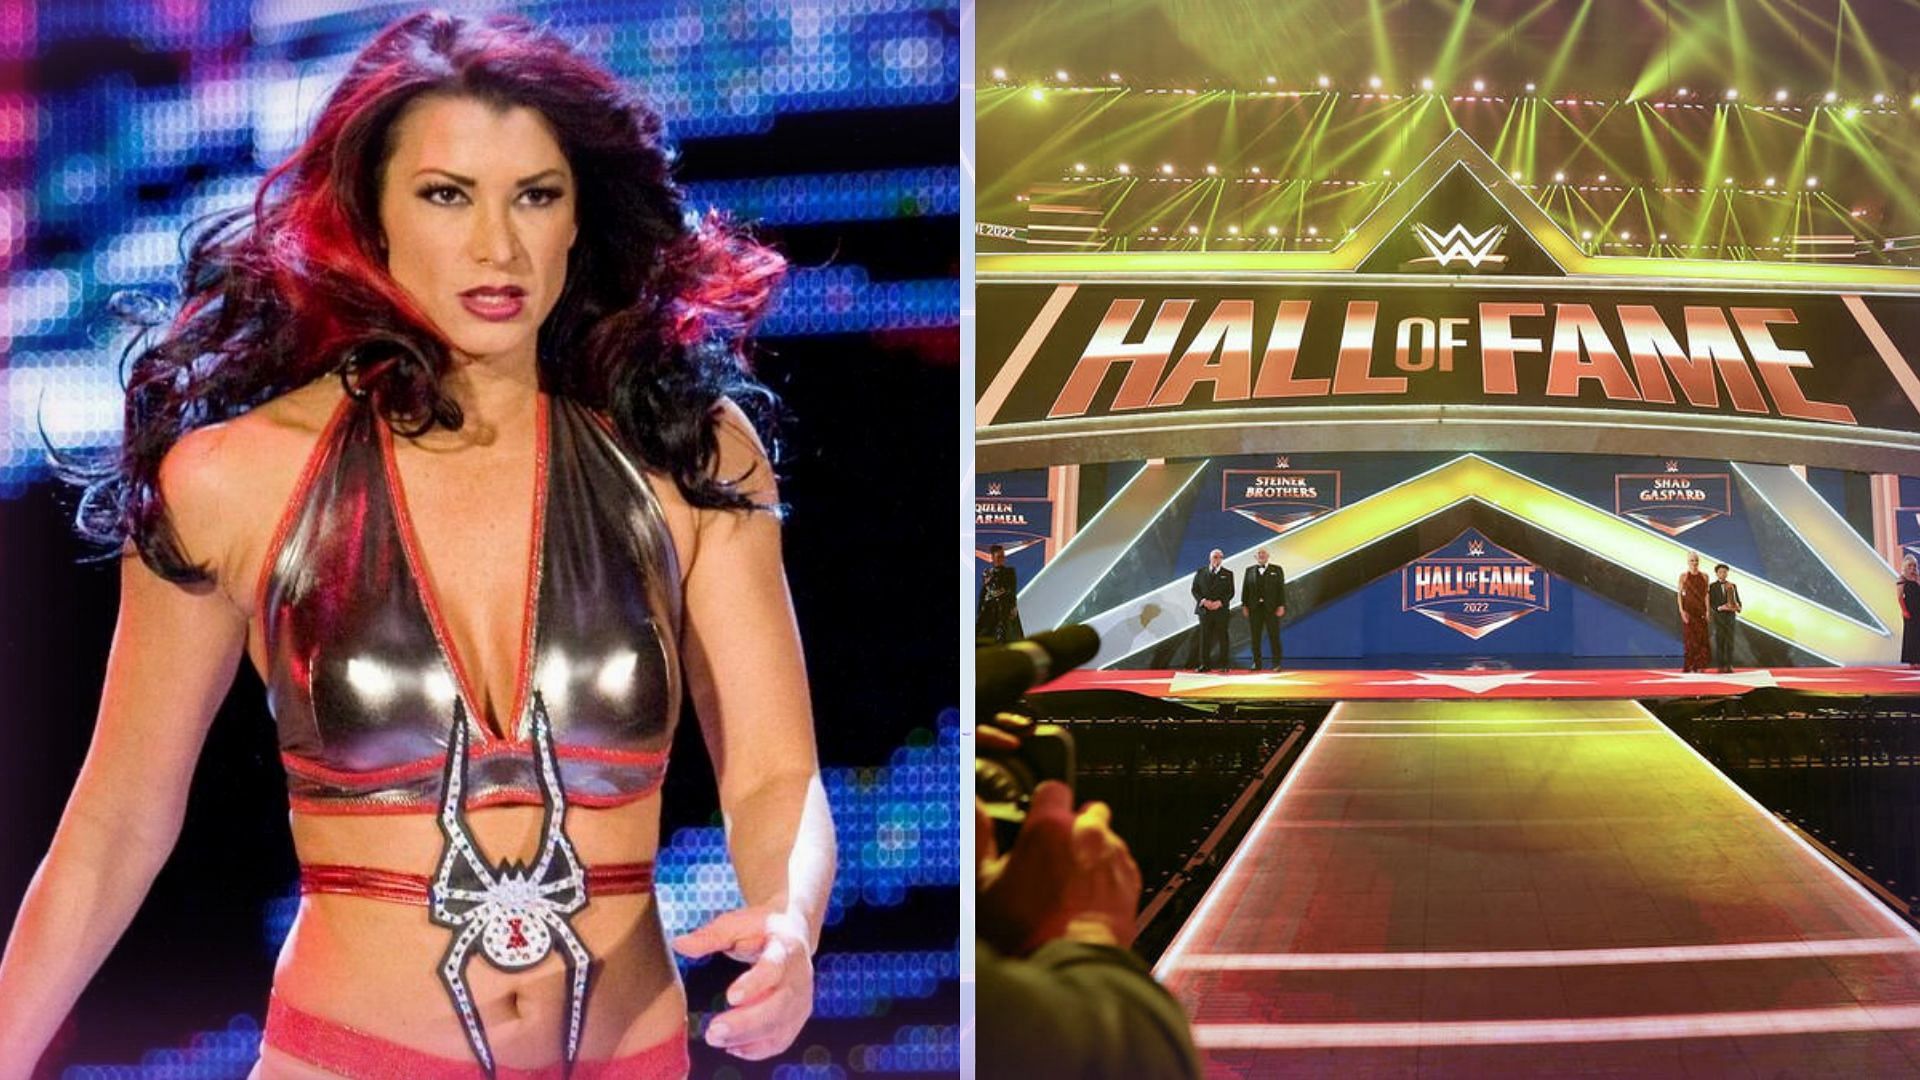 Many fans believe that Victoria should join the WWE Hall of Fame